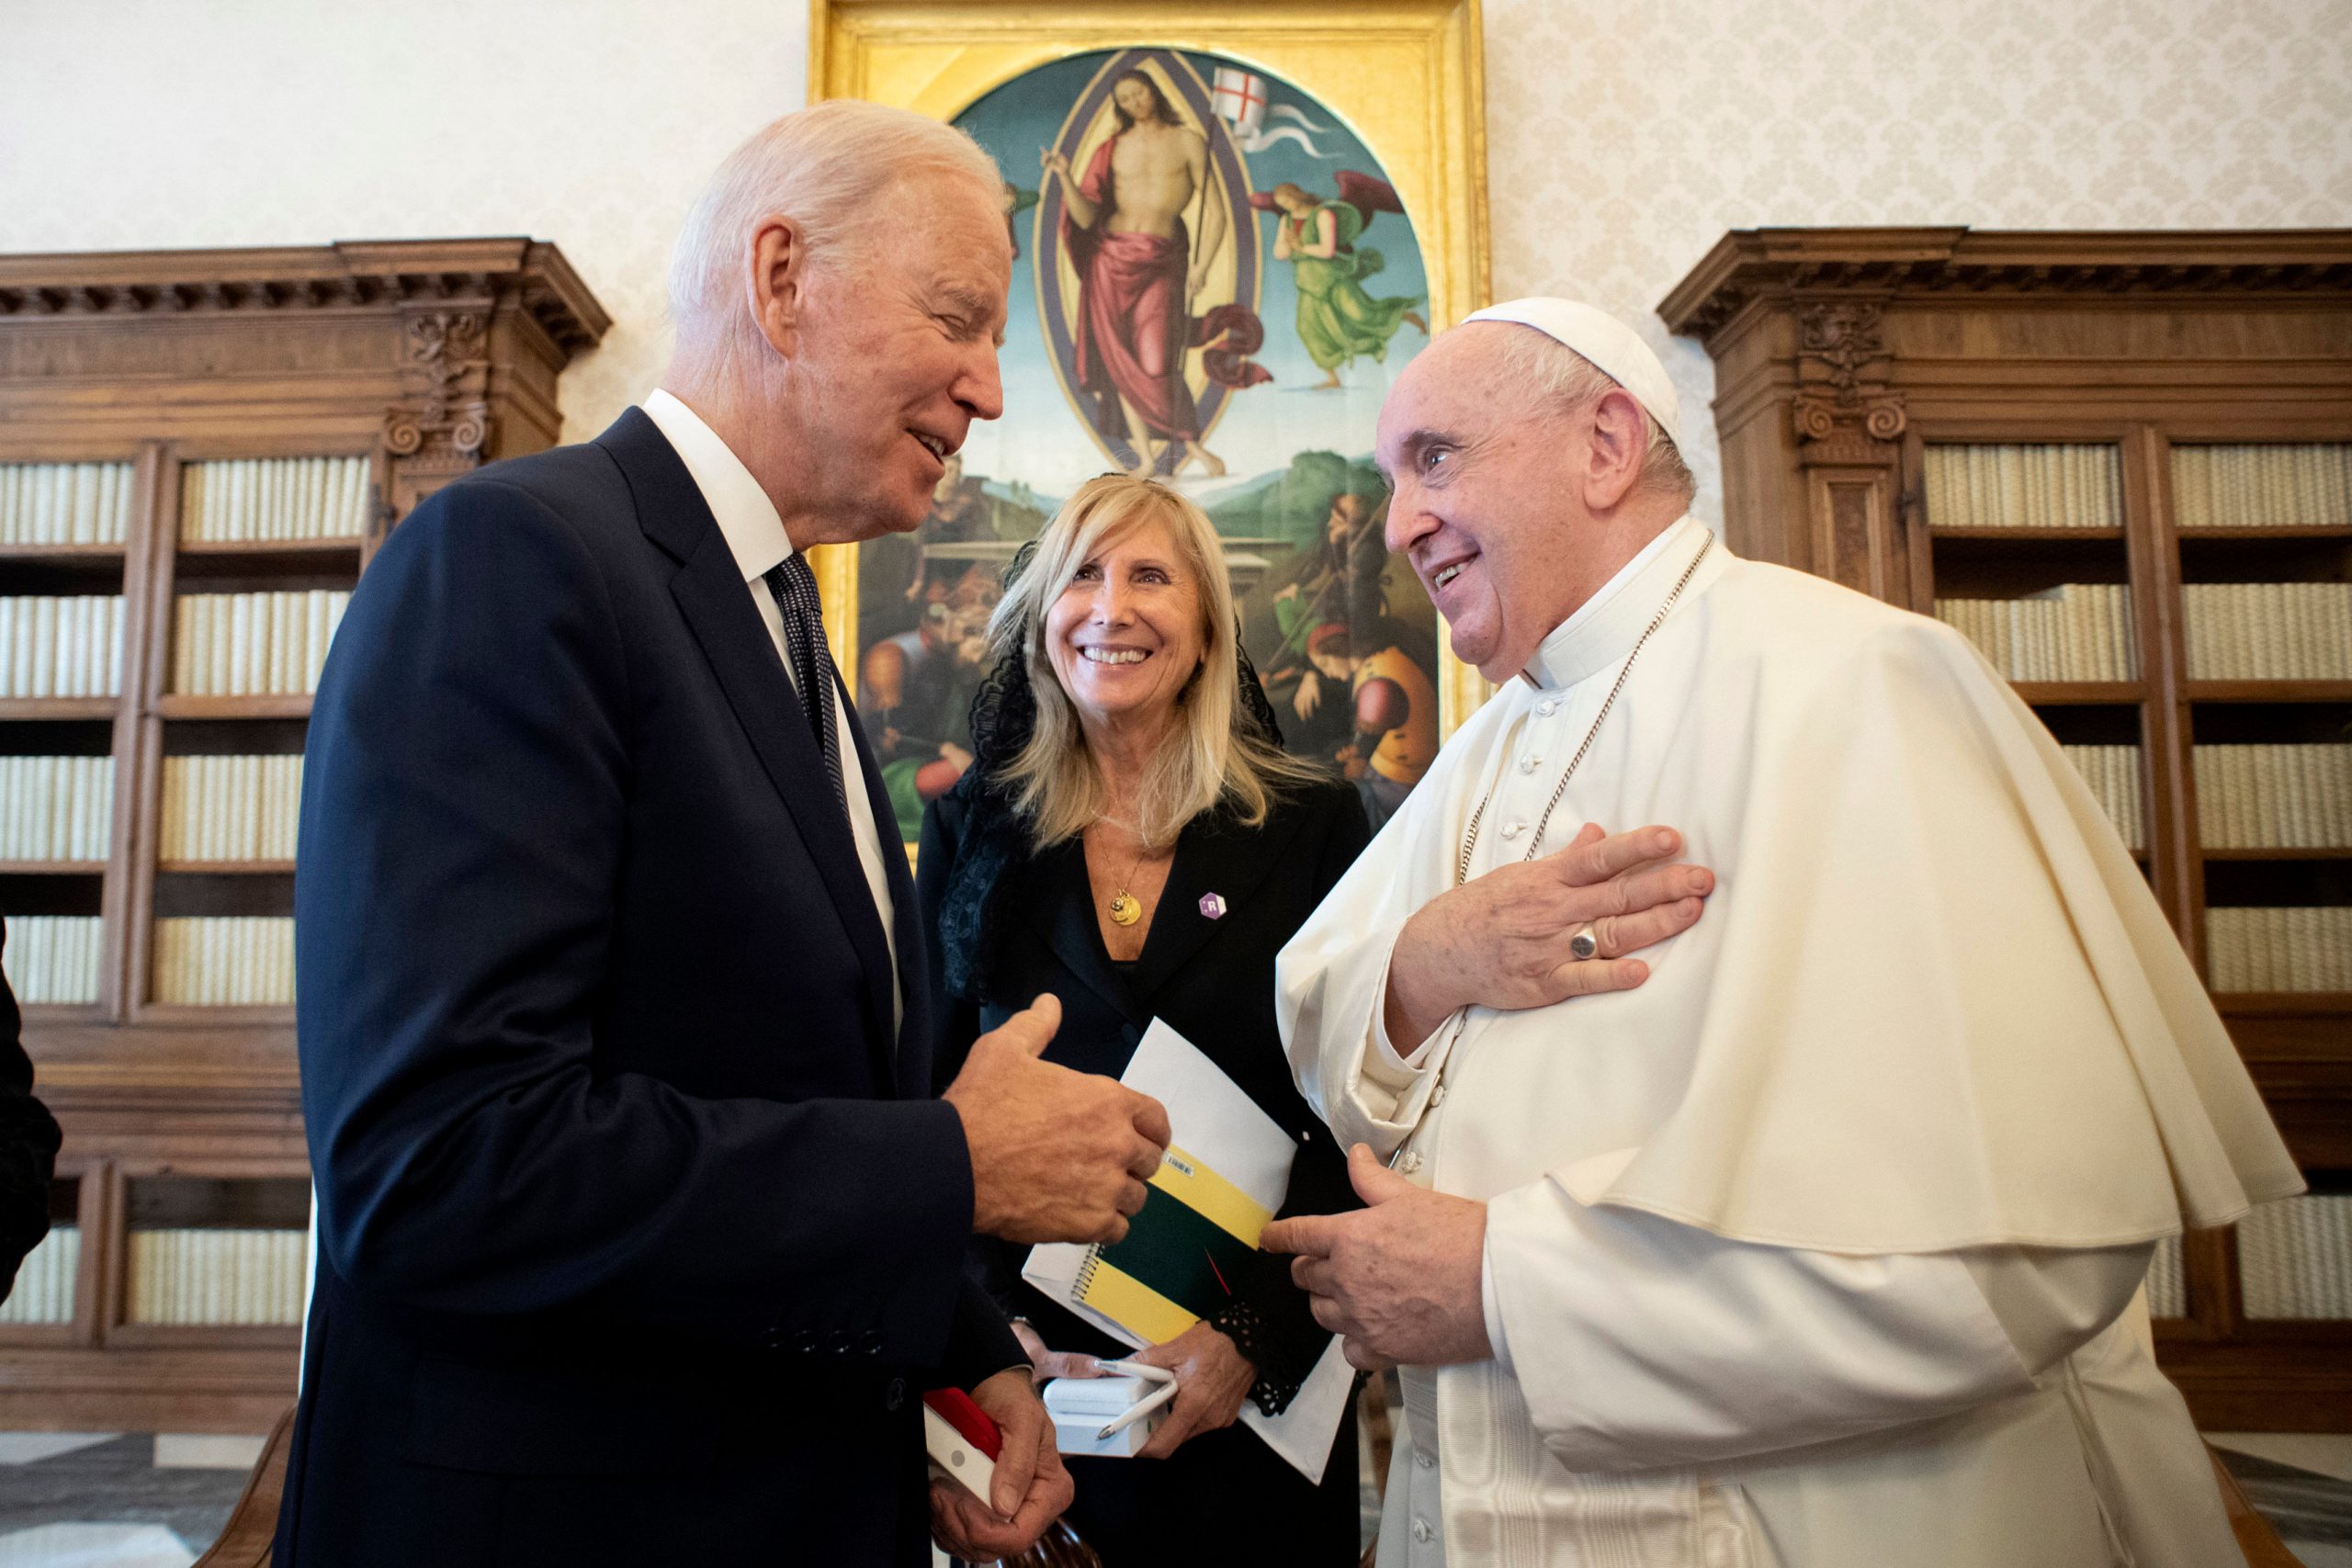 Joe Biden, Pope Francis discuss climate change, poverty in Rome